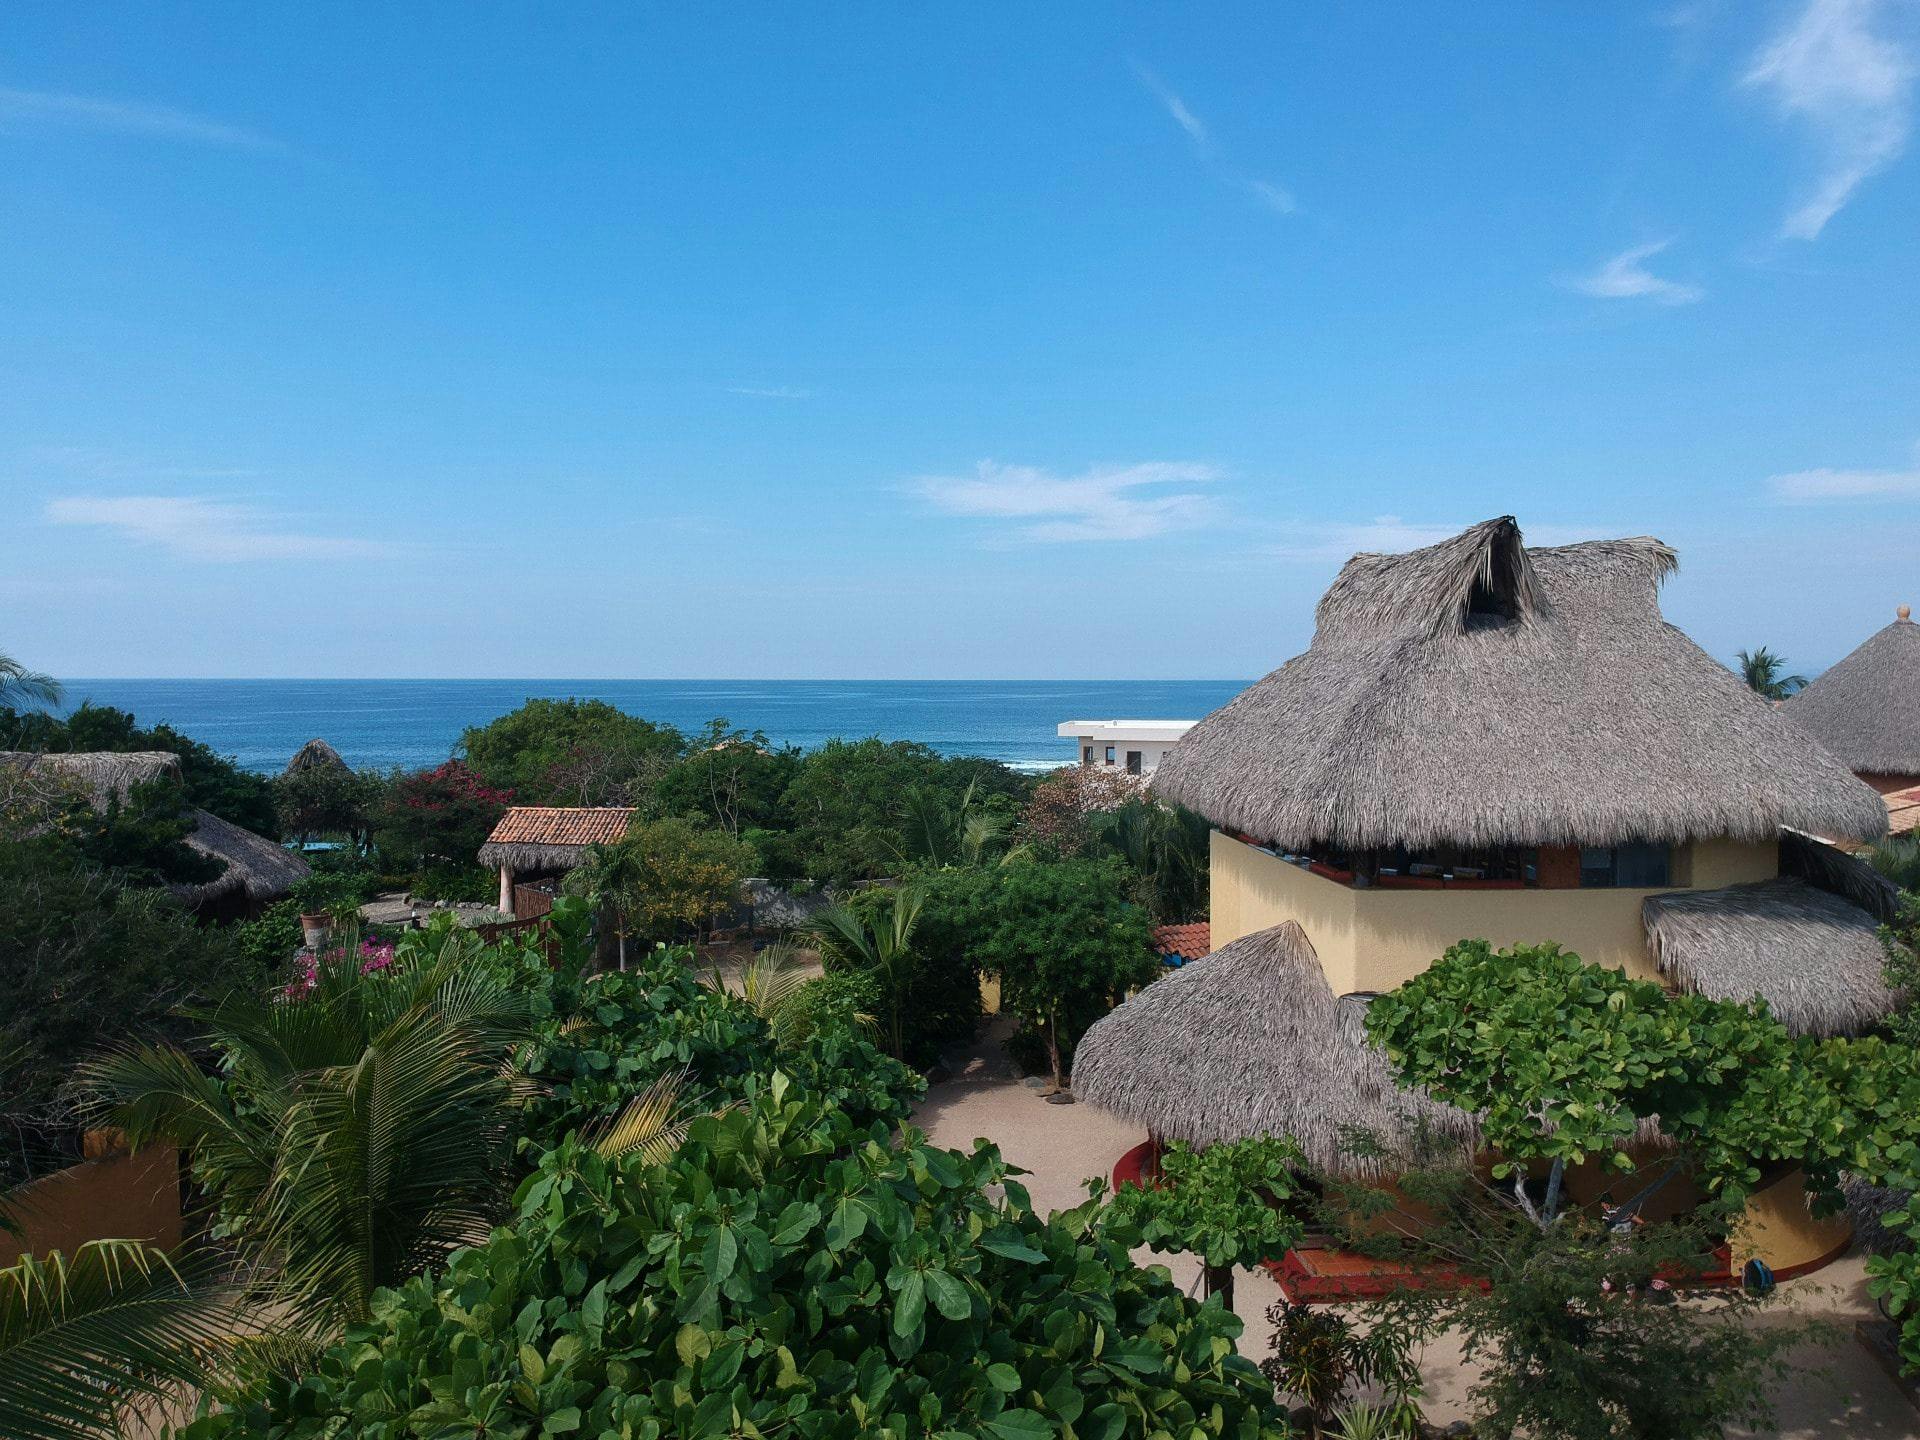 Coworking & Coliving by the surf in Trocones, Mexico at Trocones Point Hostel